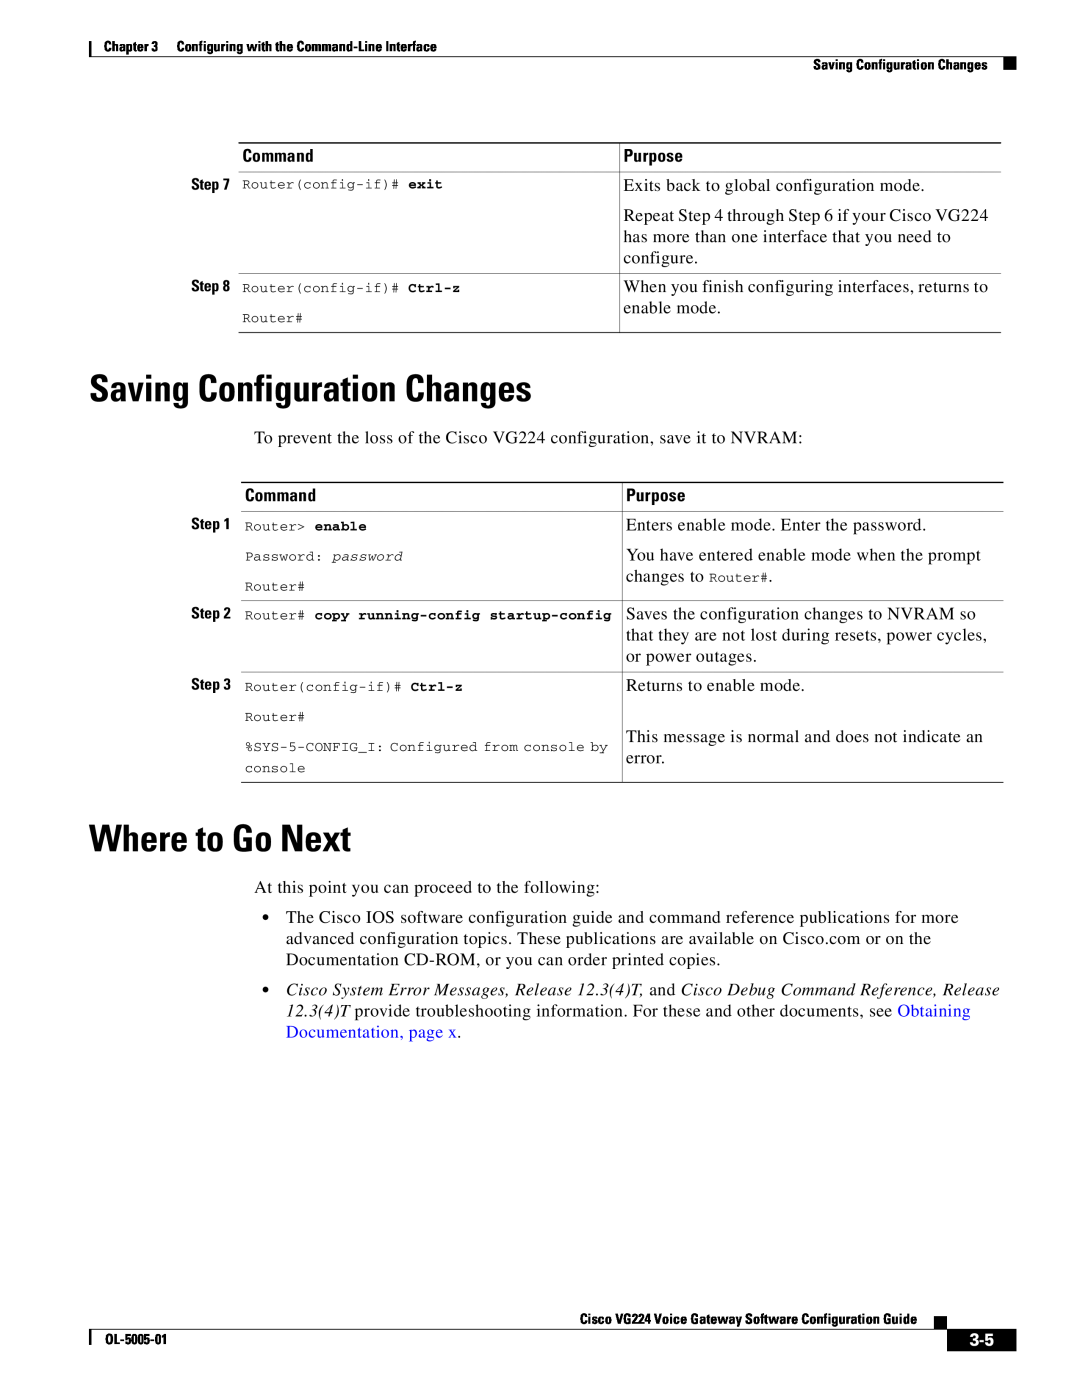 Cisco Systems VG224 manual Saving Configuration Changes, Where to Go Next, Command, Purpose 